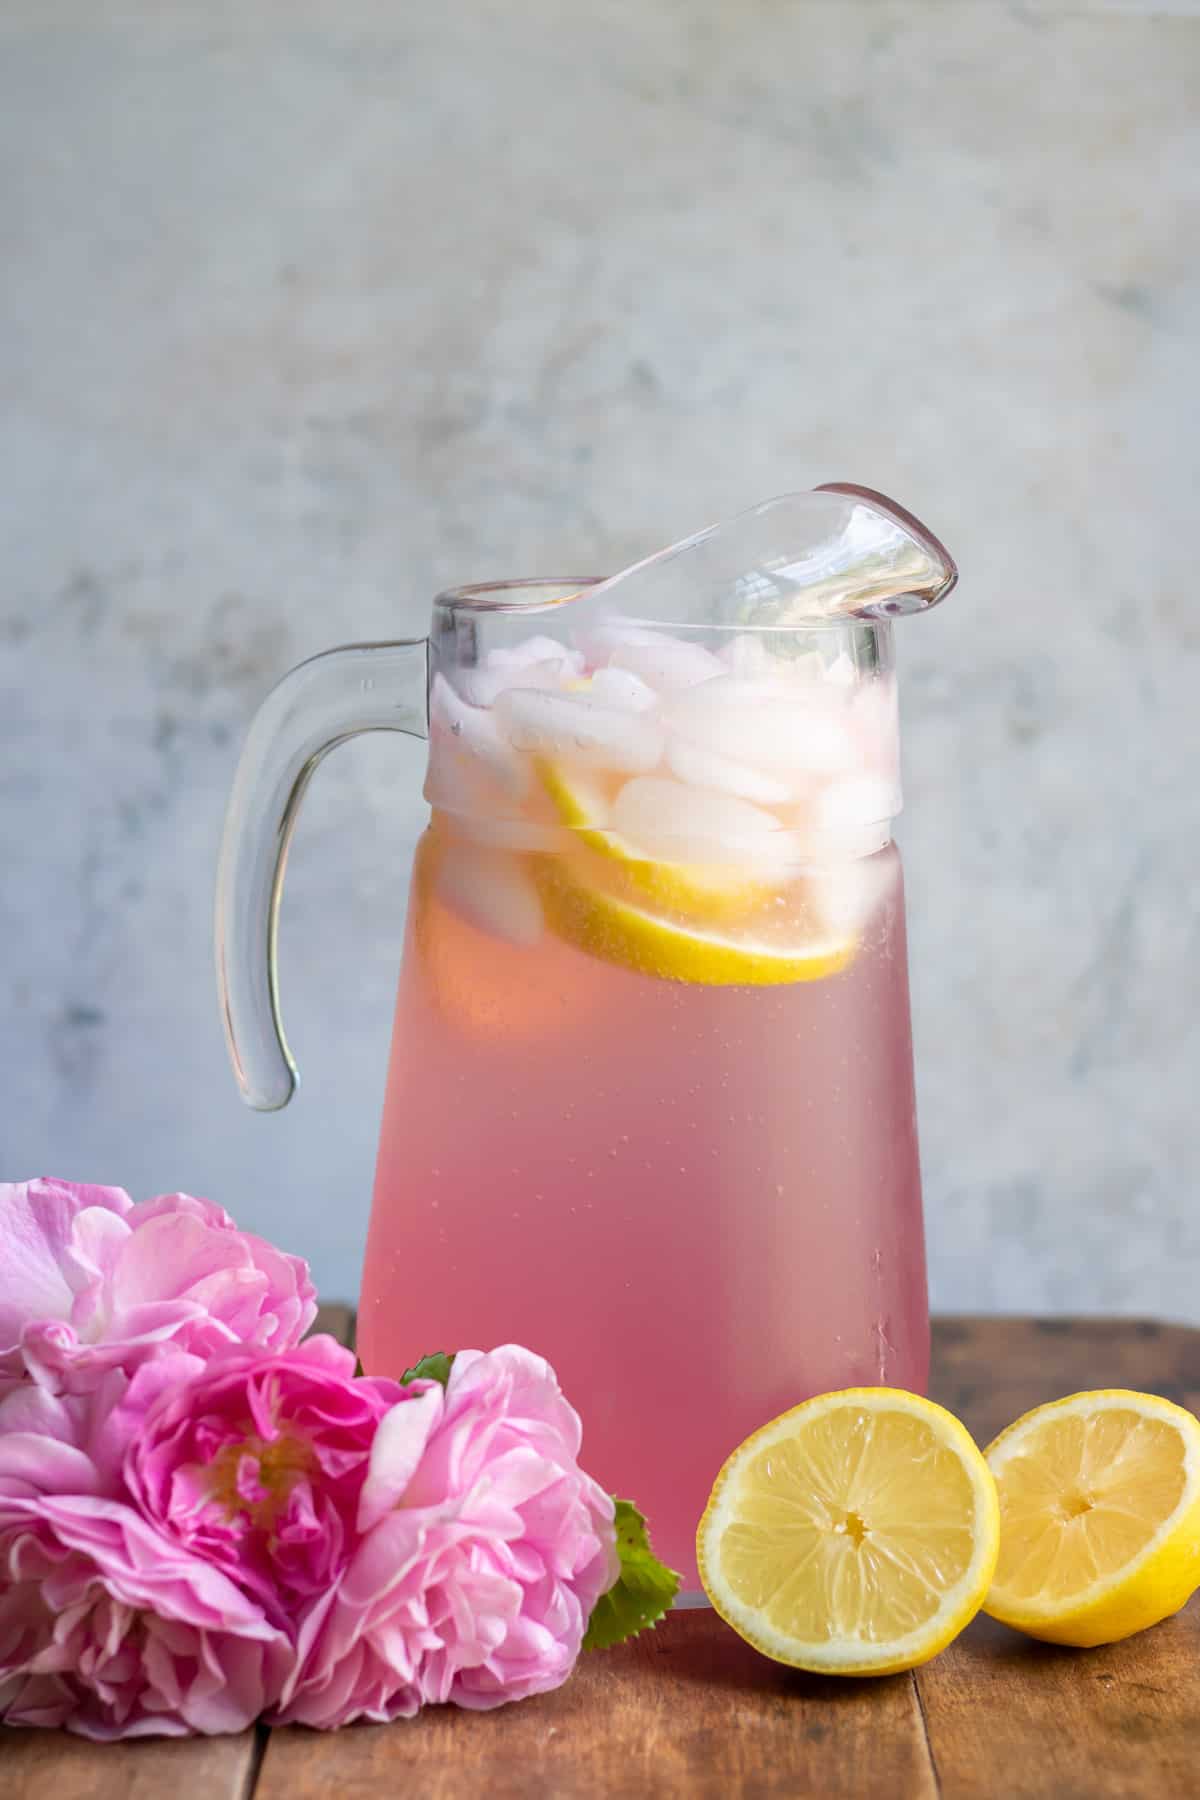 A table with a pitcher of lemonade with rose simple syrup, next to roses and lemons.